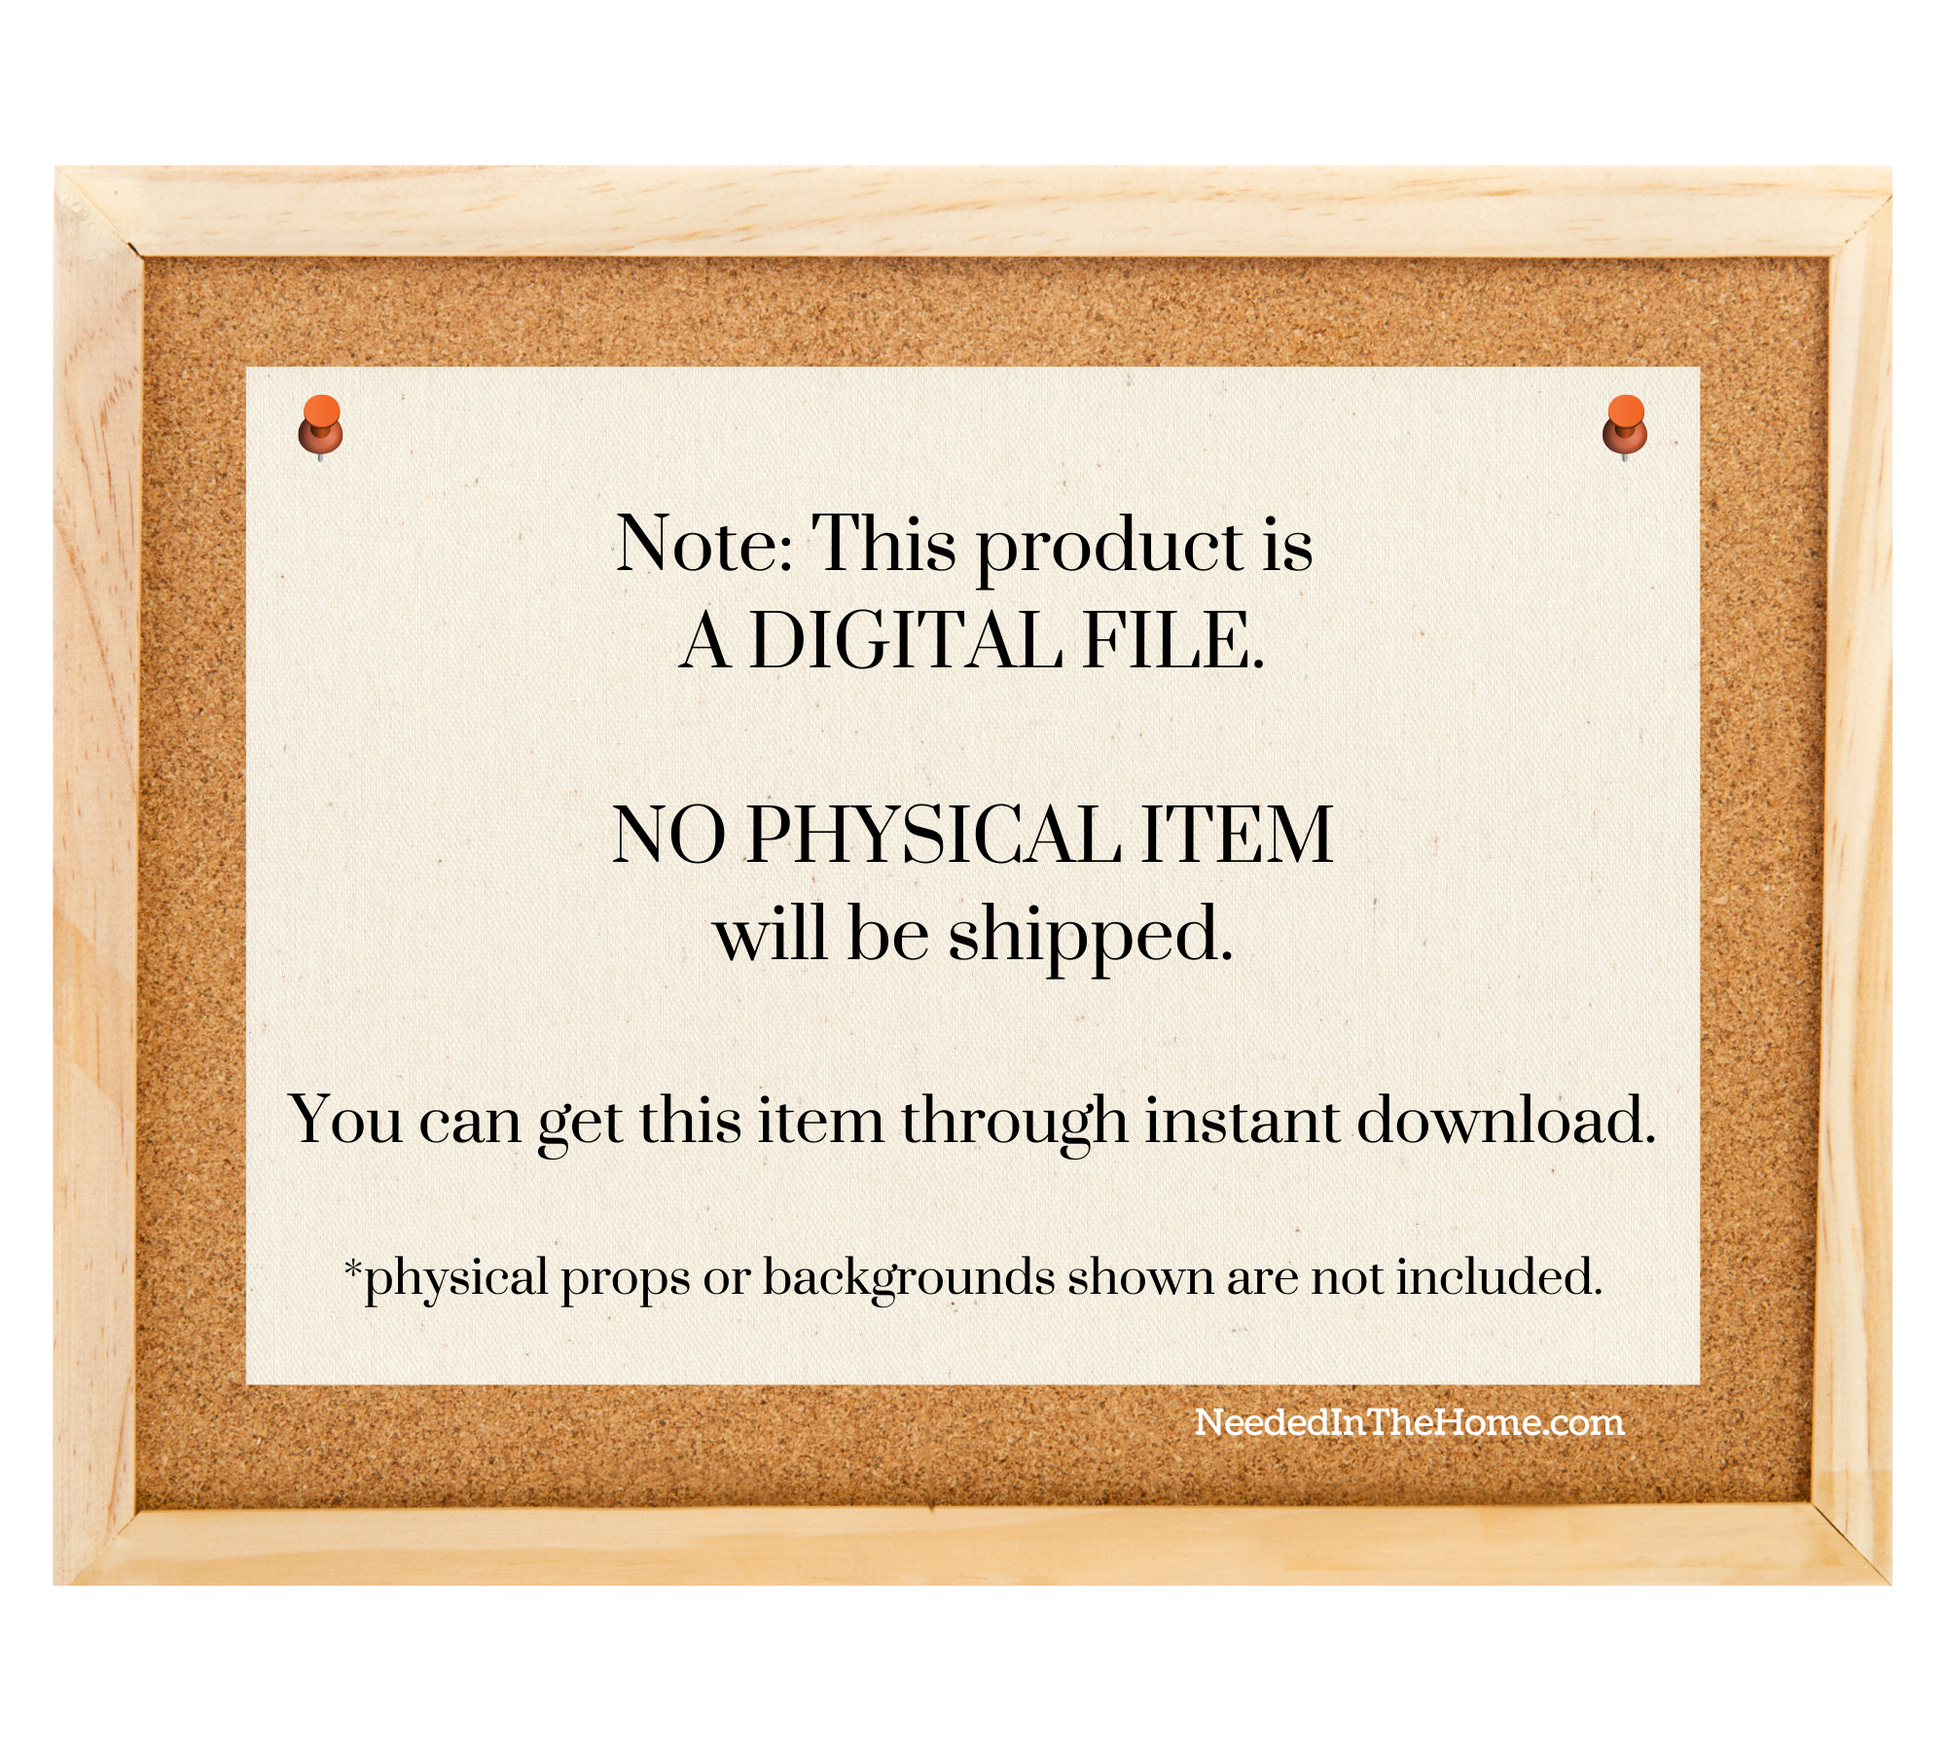 bulletin board with a note pinned up that says note this product is a digital file no physical item will be shipped you can get this item through instant download physical props or backgrounds shown are not included neededinthehome